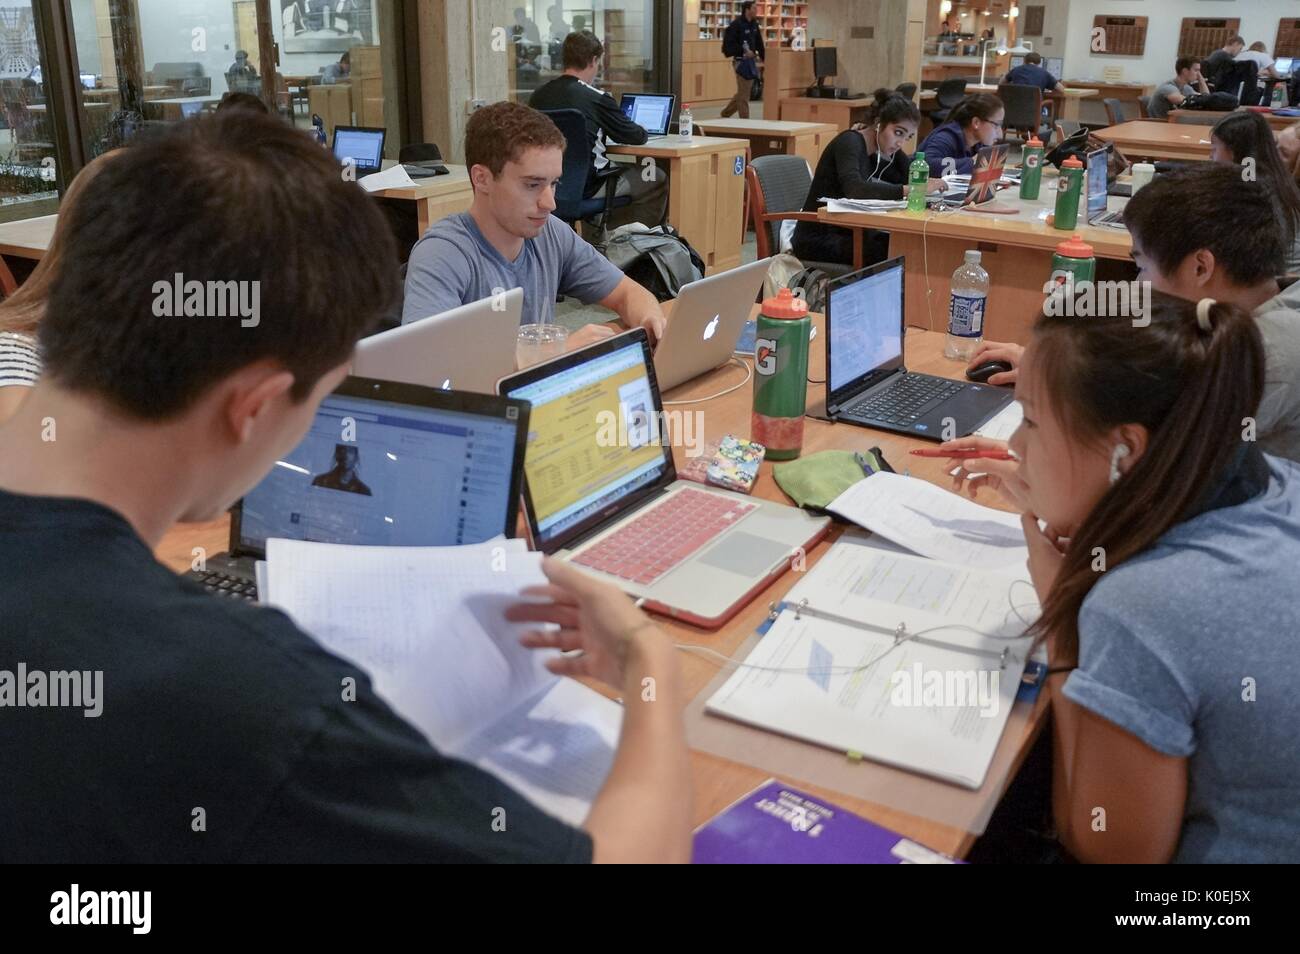 Multiple groups of college students sit together at tables in the Milton S Eisenhower Library at Johns Hopkins University, studying from notebooks and laptops, with water bottles and papers scattered across the tables, Baltimore, Maryland, 2014. Courtesy Eric Chen. Stock Photo